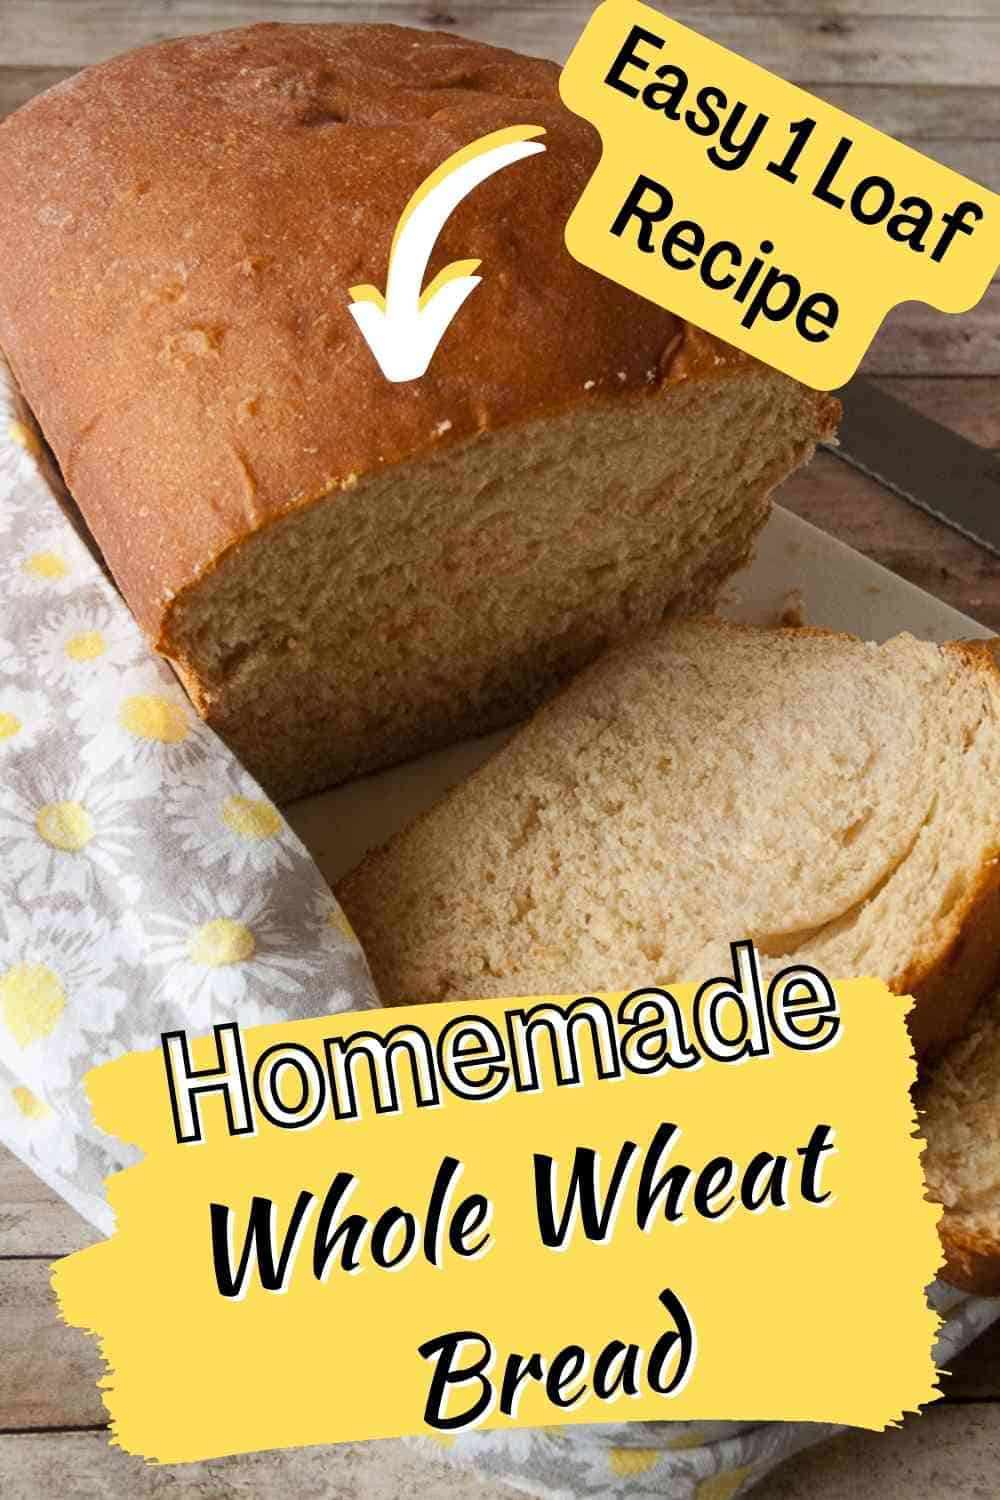 Homemade Whole Wheat Bread - Mindee's Cooking Obsession